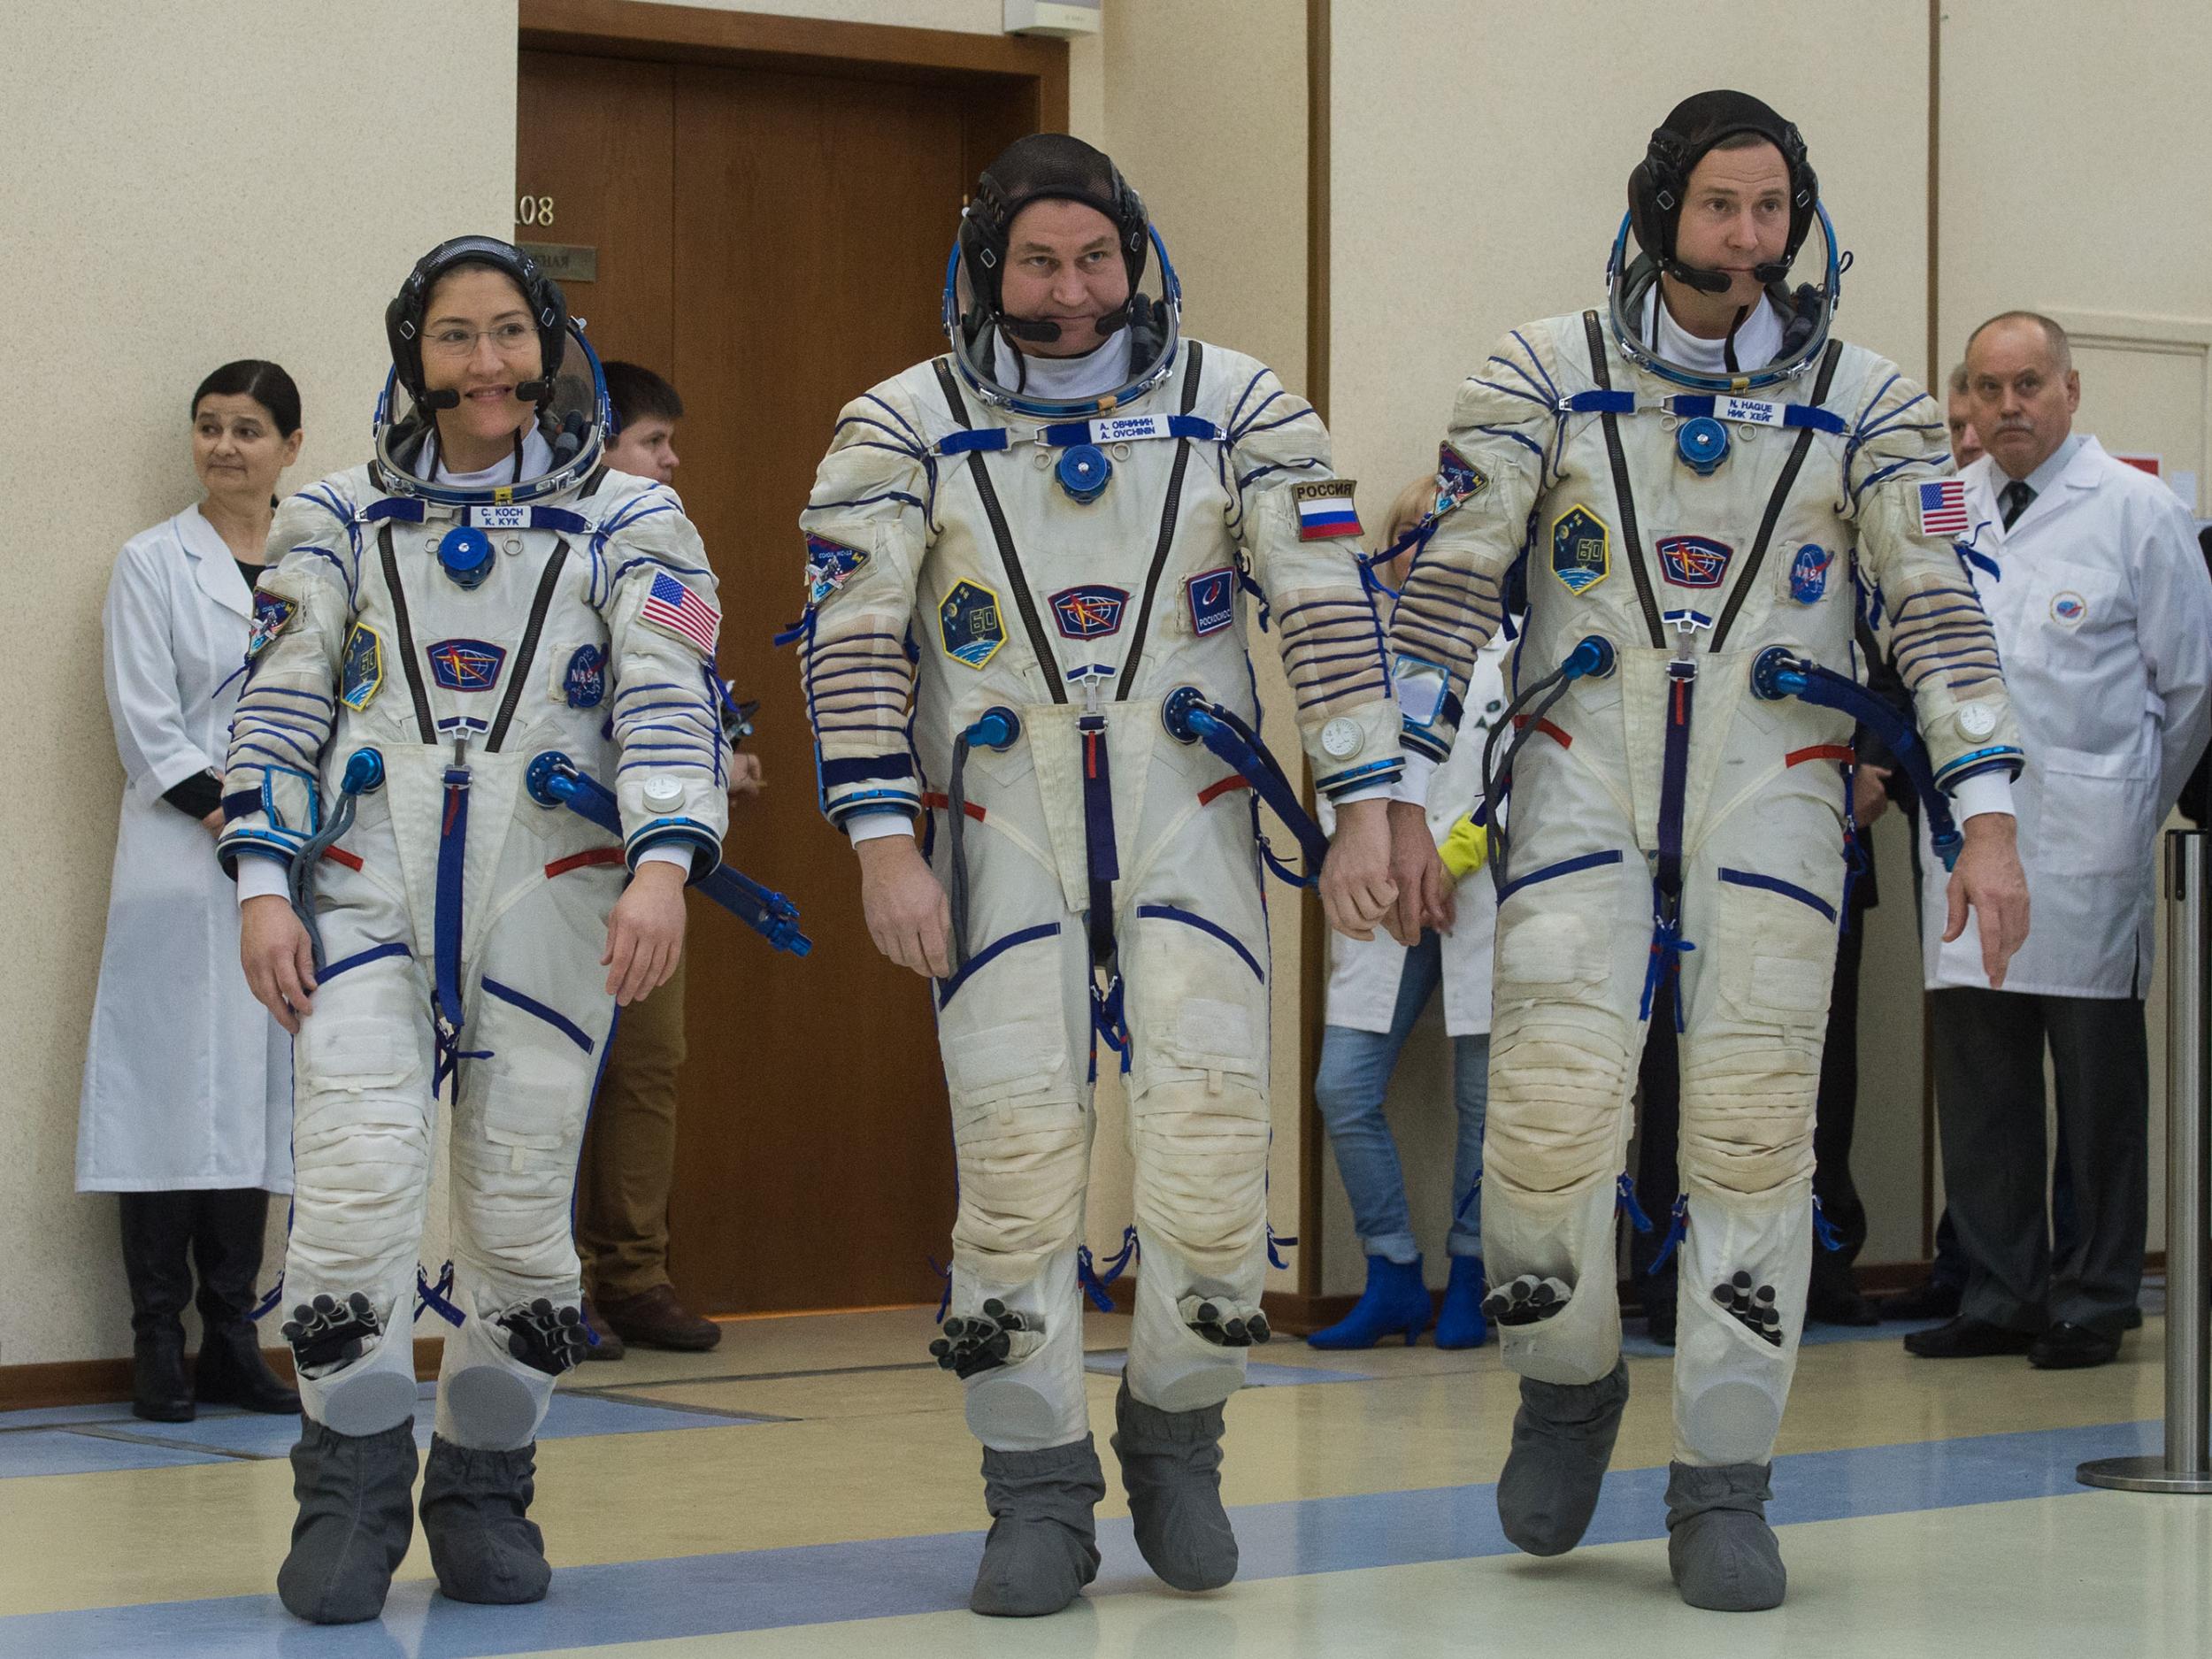 Members of the International Space Station expedition 59/60: Christina Koch, Nick Hague and cosmonaut Alexey Ovchinin